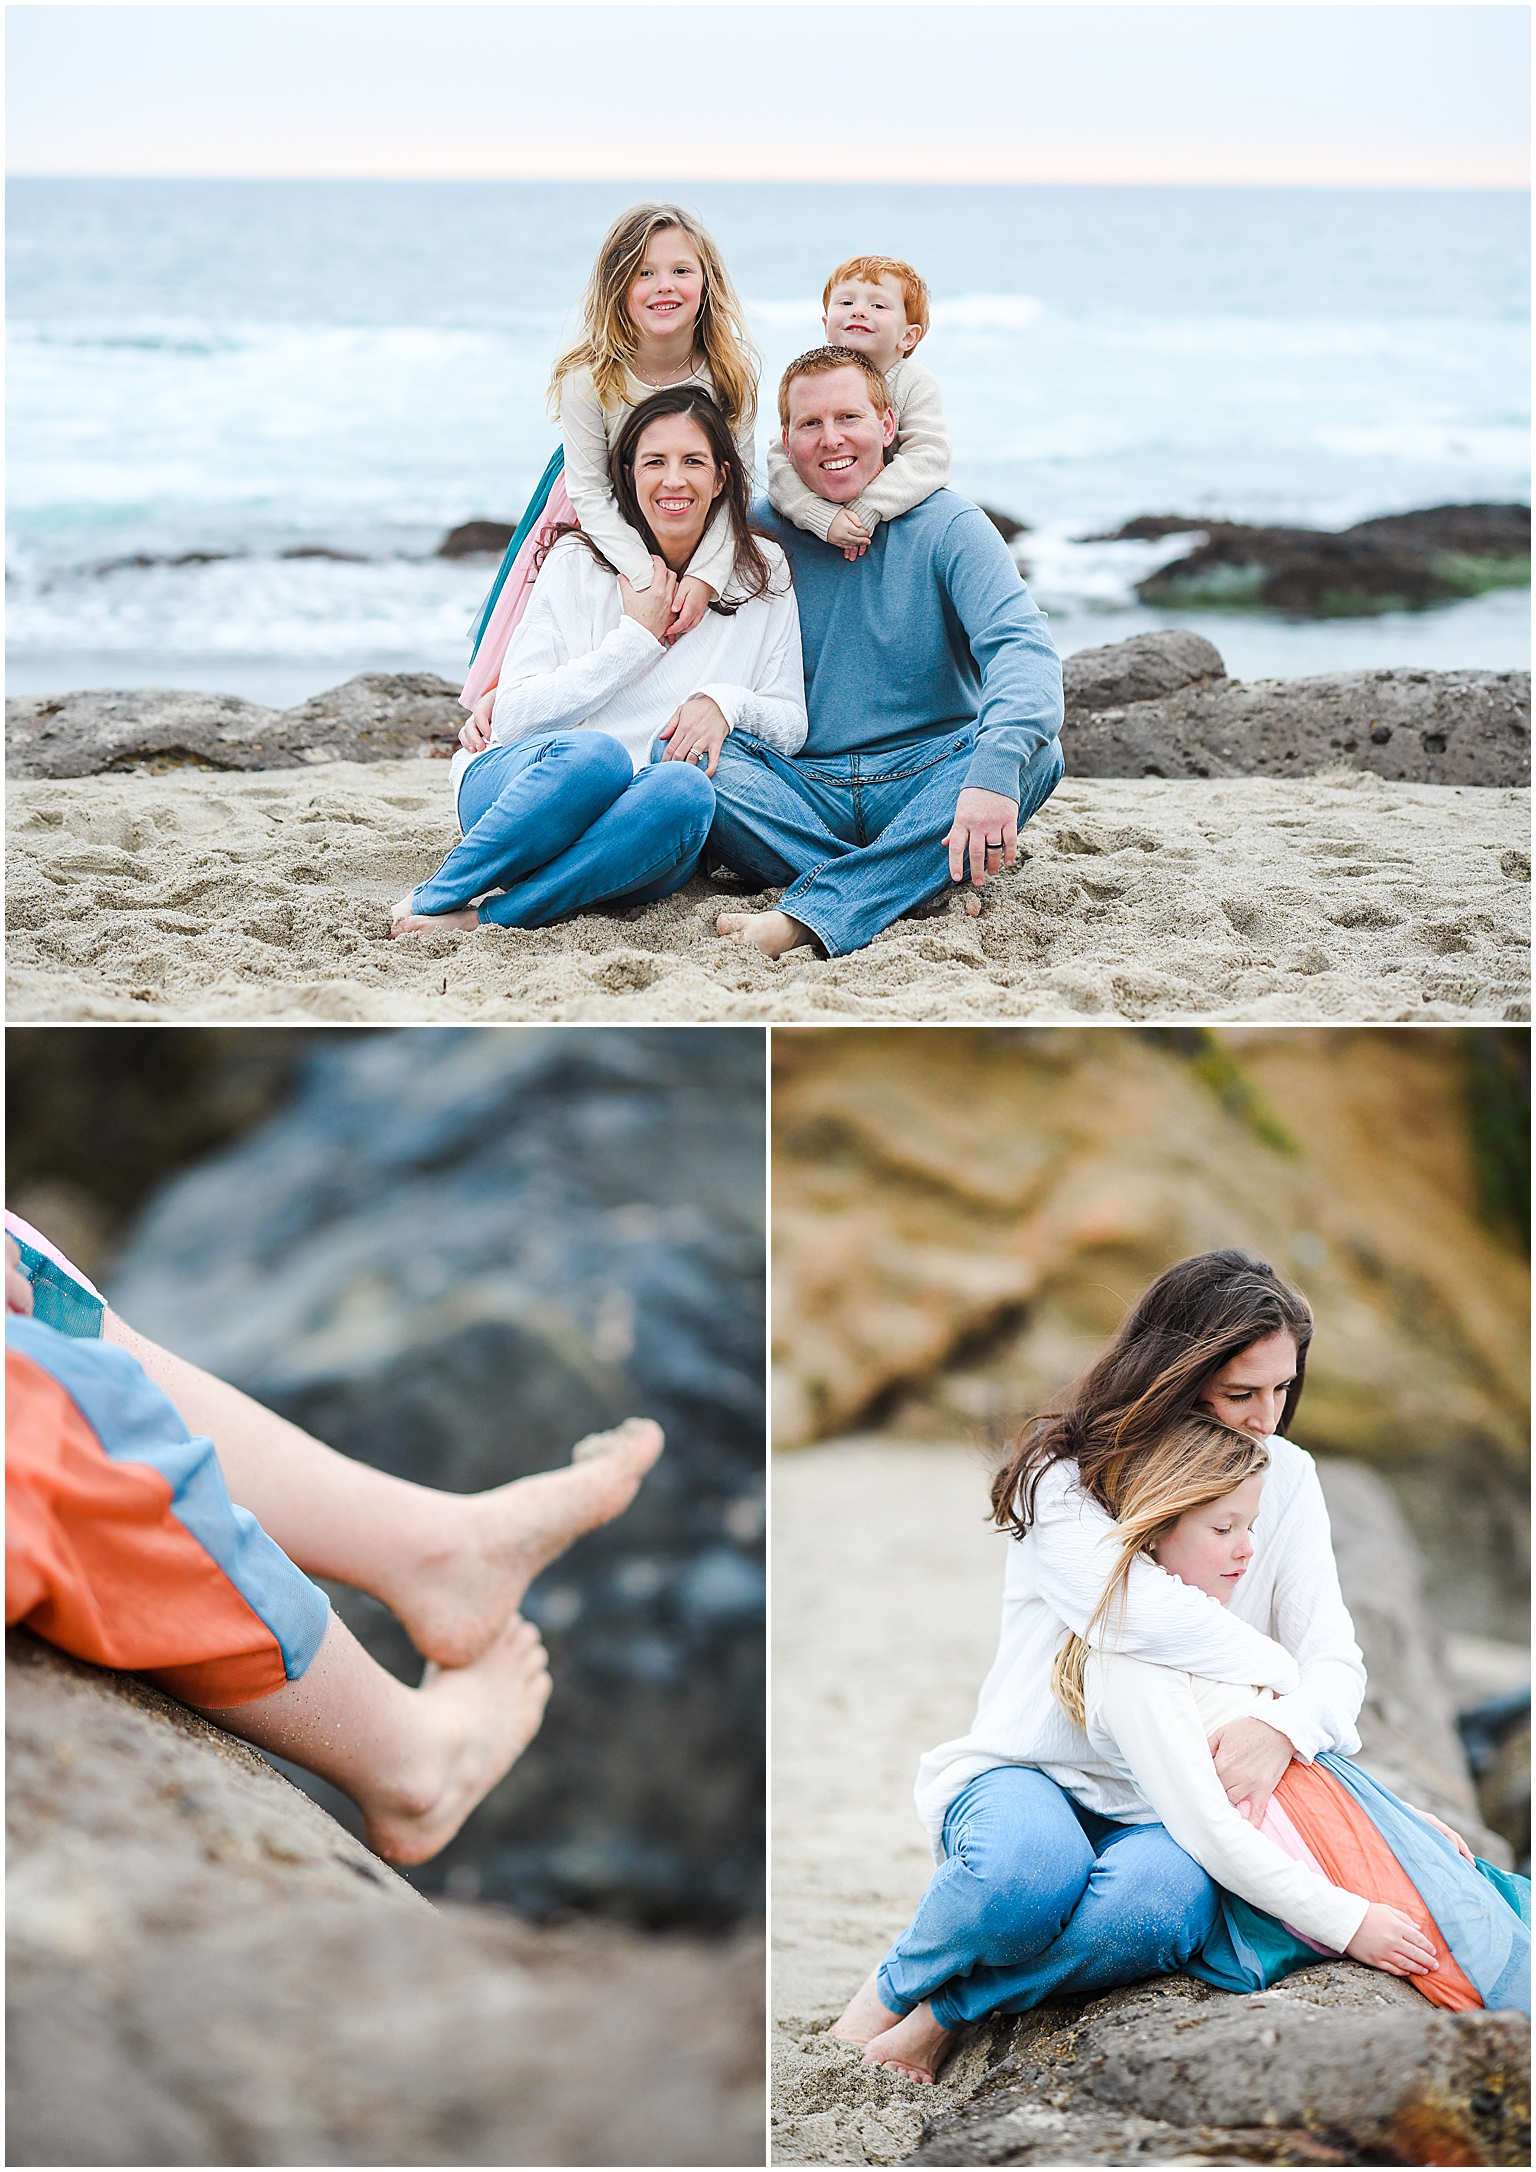 Family portraits with little kids at the beach outside Montage Laguna Beach.